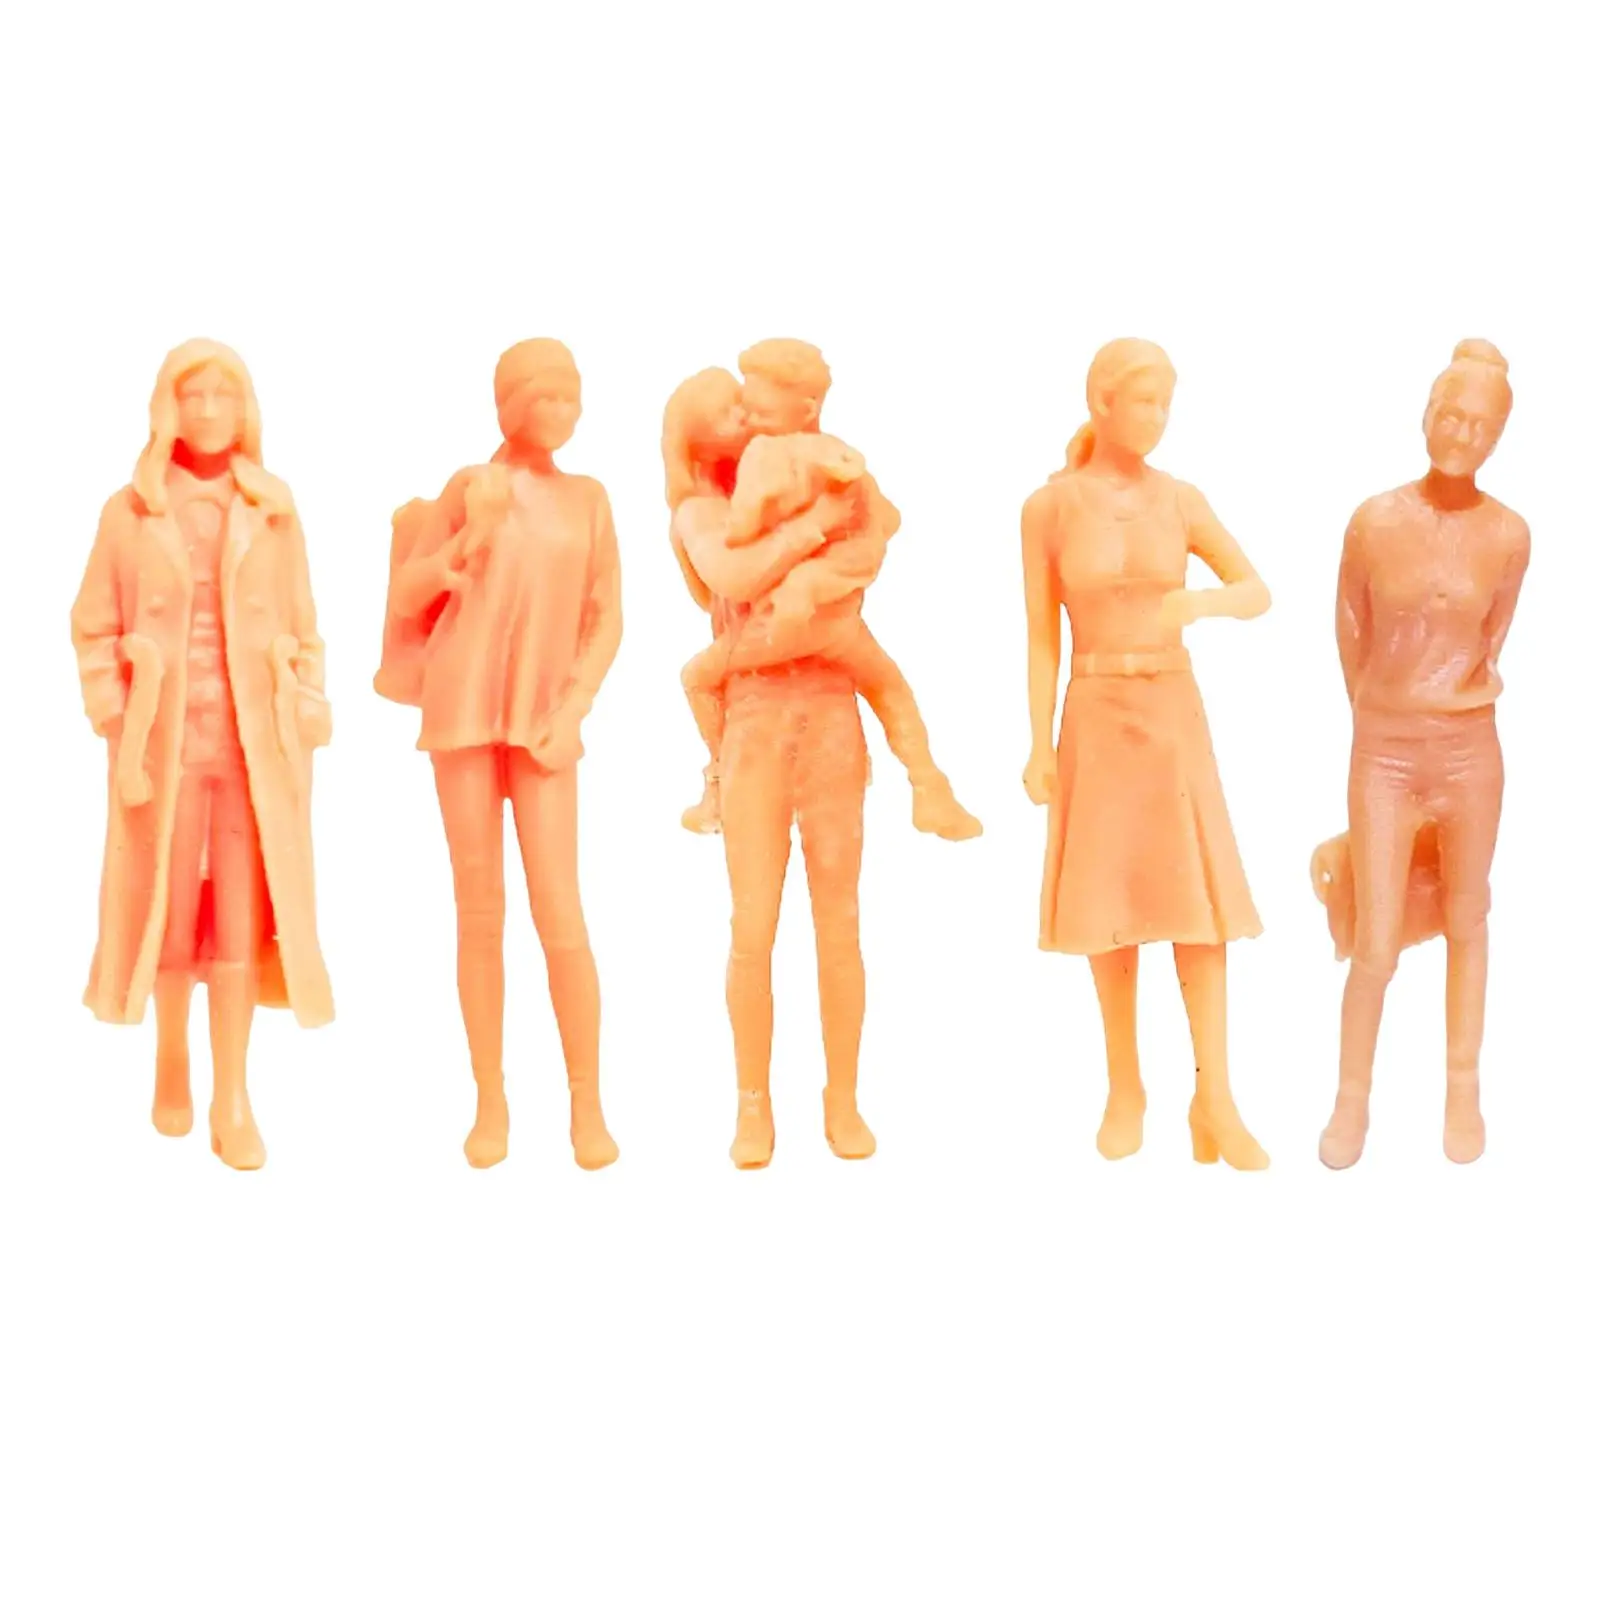 1/64 Figures Scenes Unpainted Realistic Character Doll Tiny People Miniatures for Diorama Building Architectural Model Train